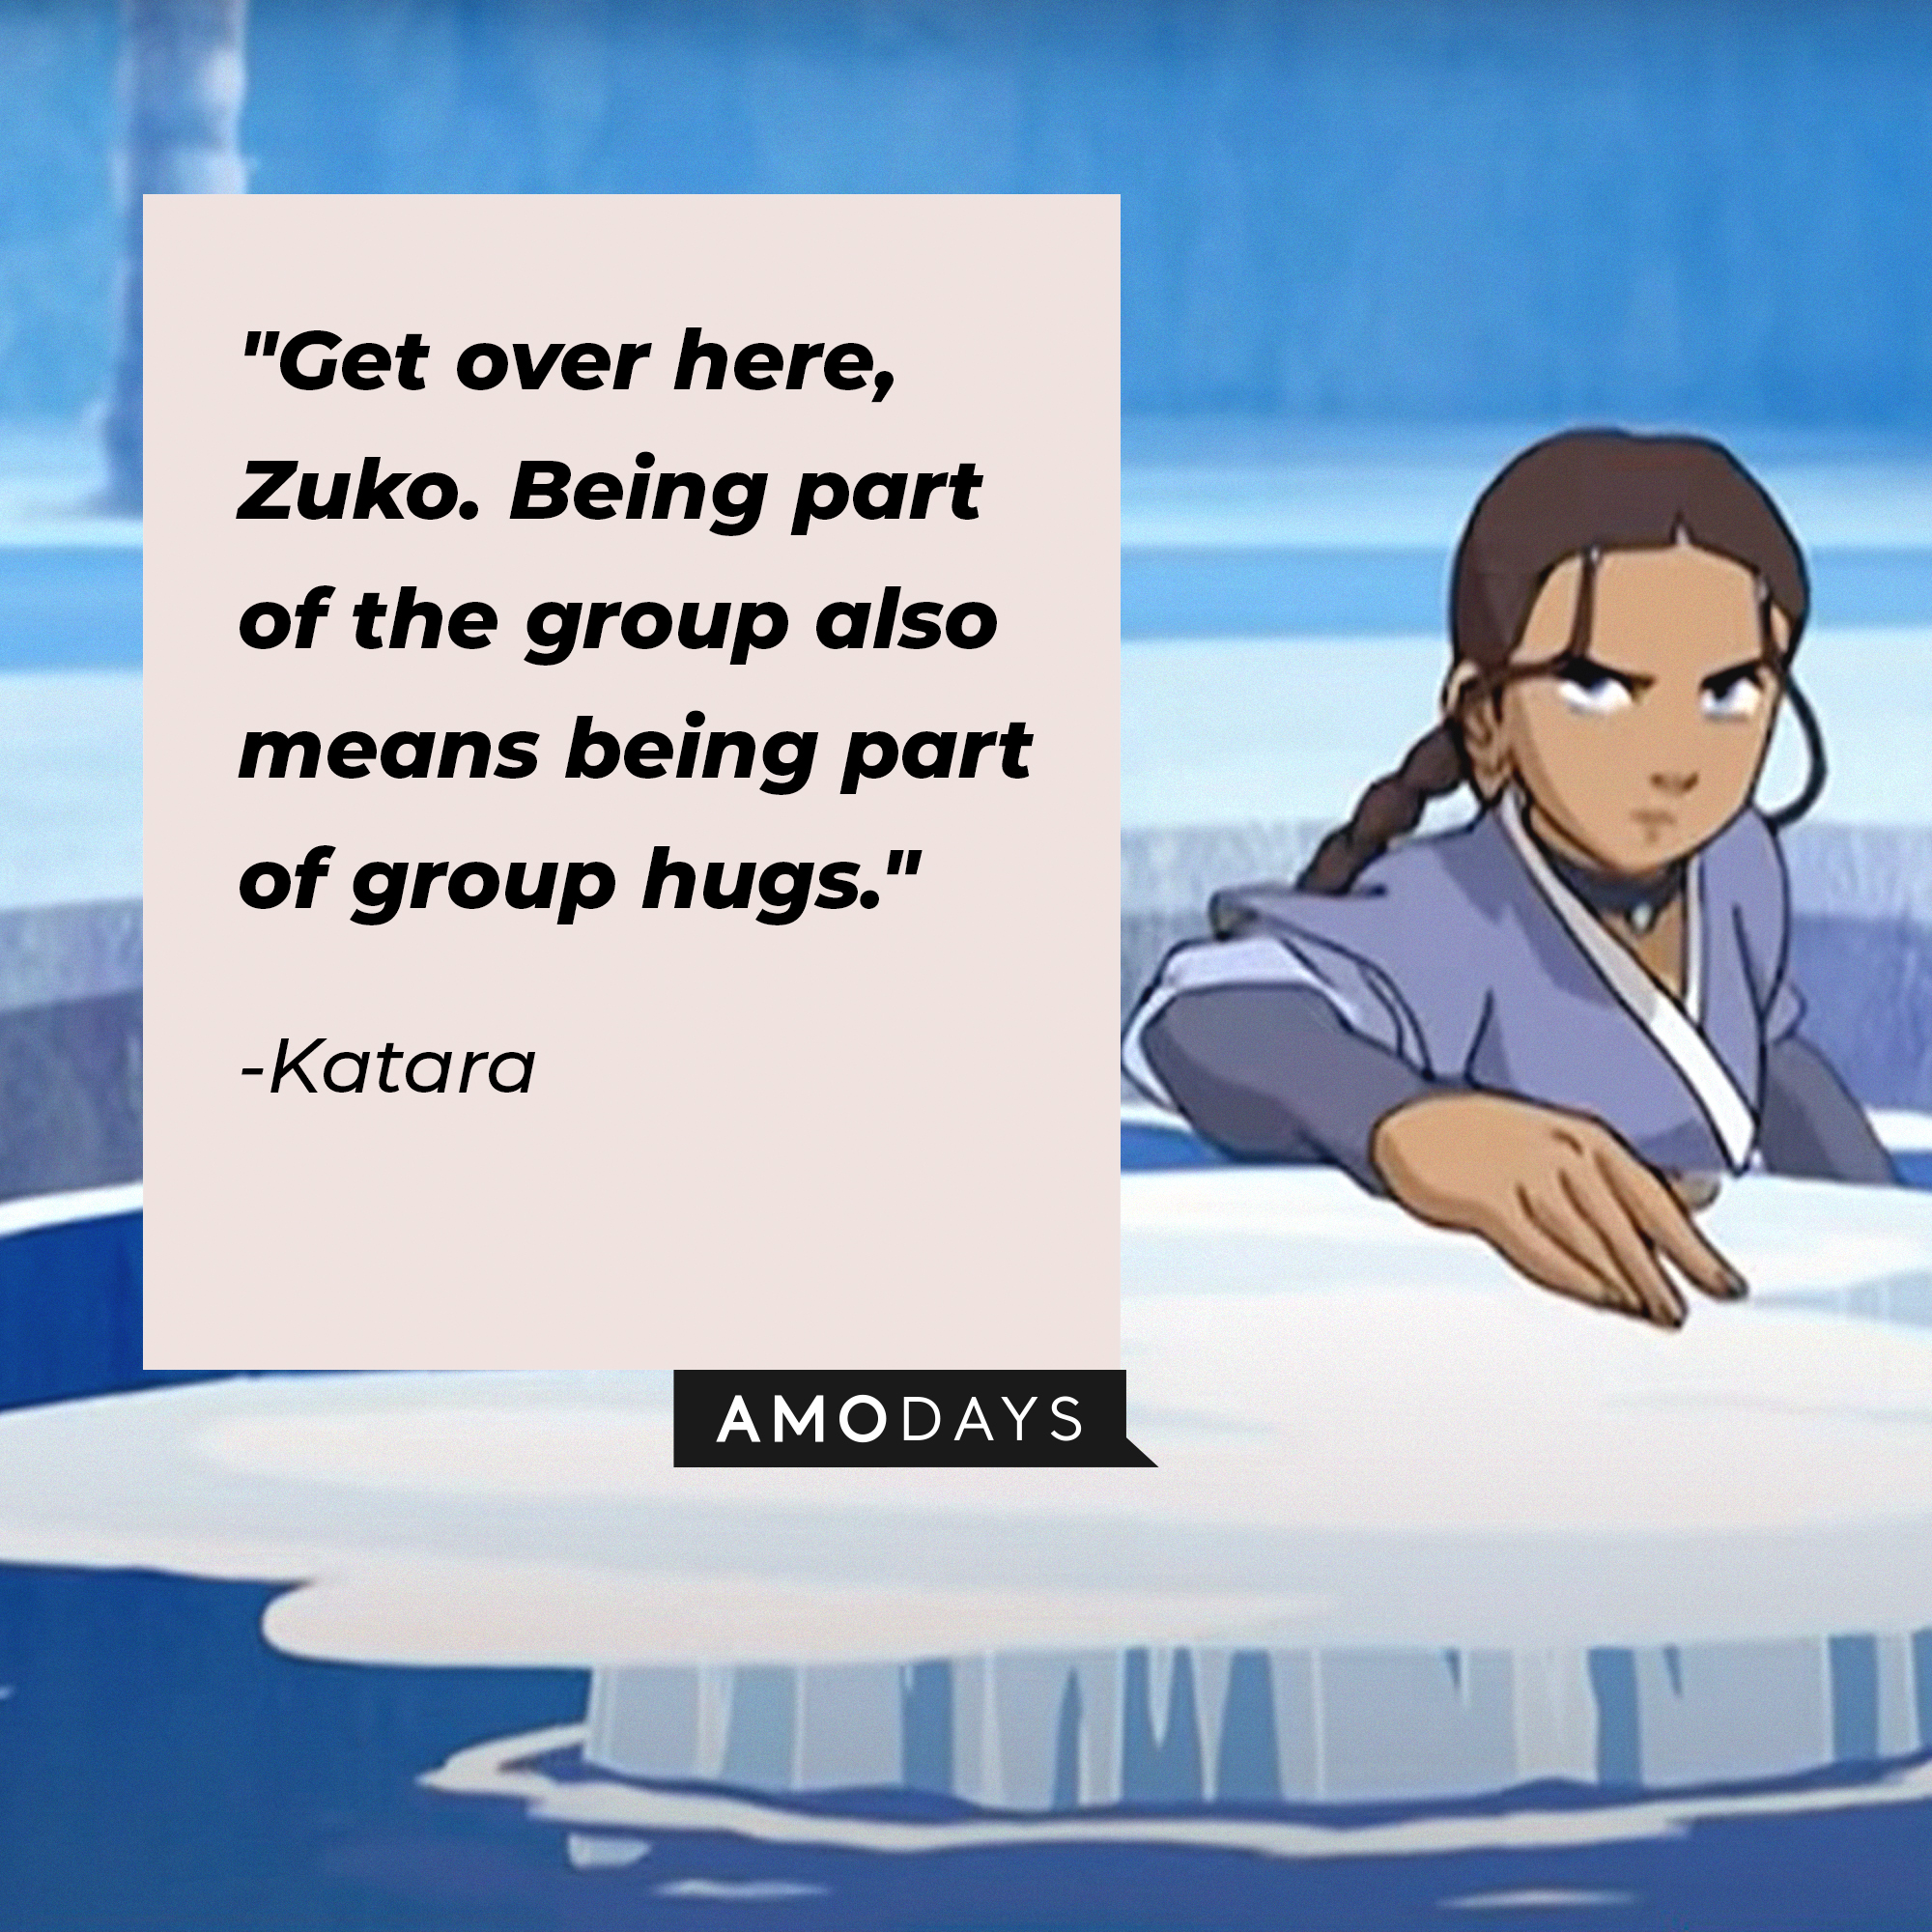 Katara's quote: "Get over here, Zuko. Being part of the group also means being part of group hugs." | Source: Youtube.com/TeamAvatar